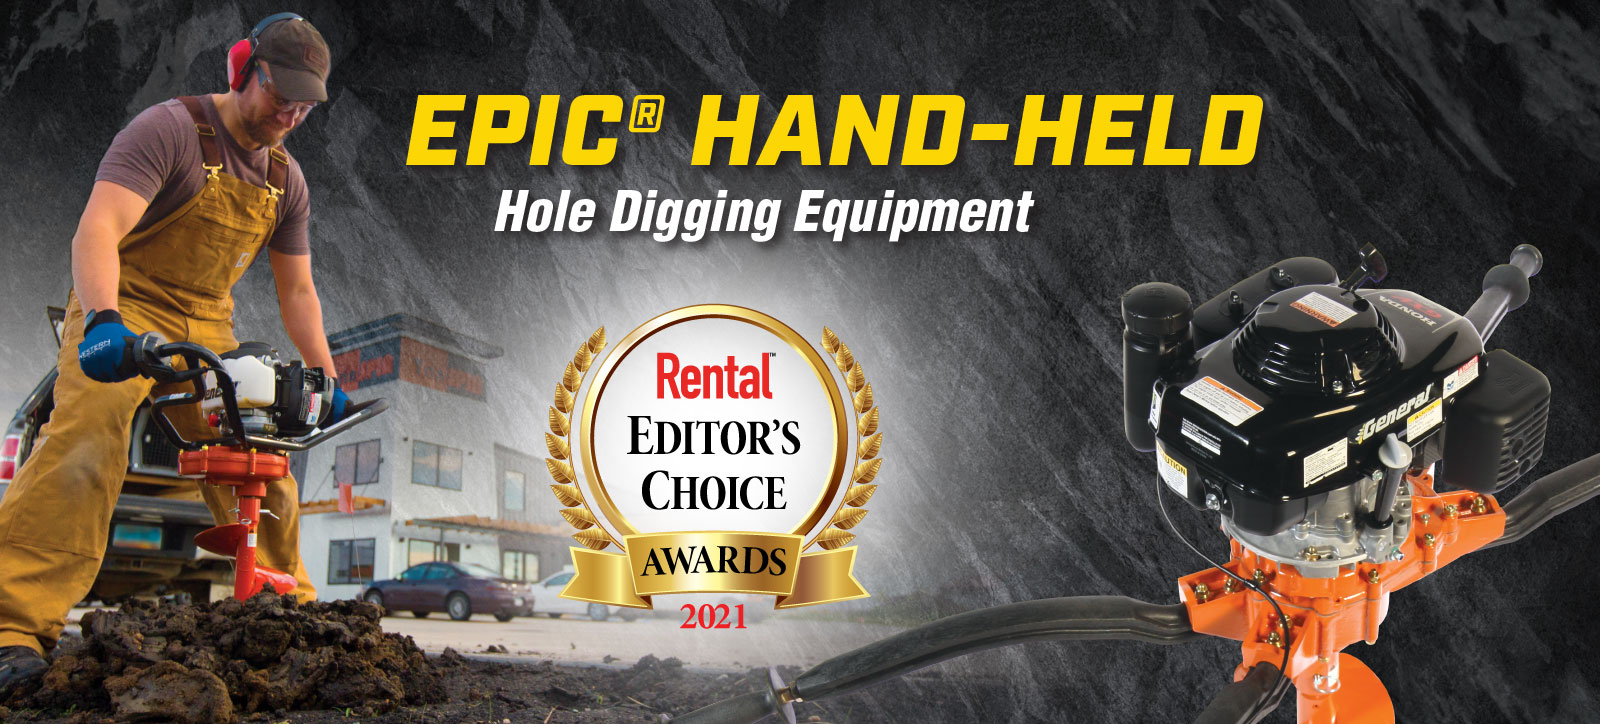 Epic Hand-Held Hole Digging Equipment: Rental Editor's Choice Awards 2021